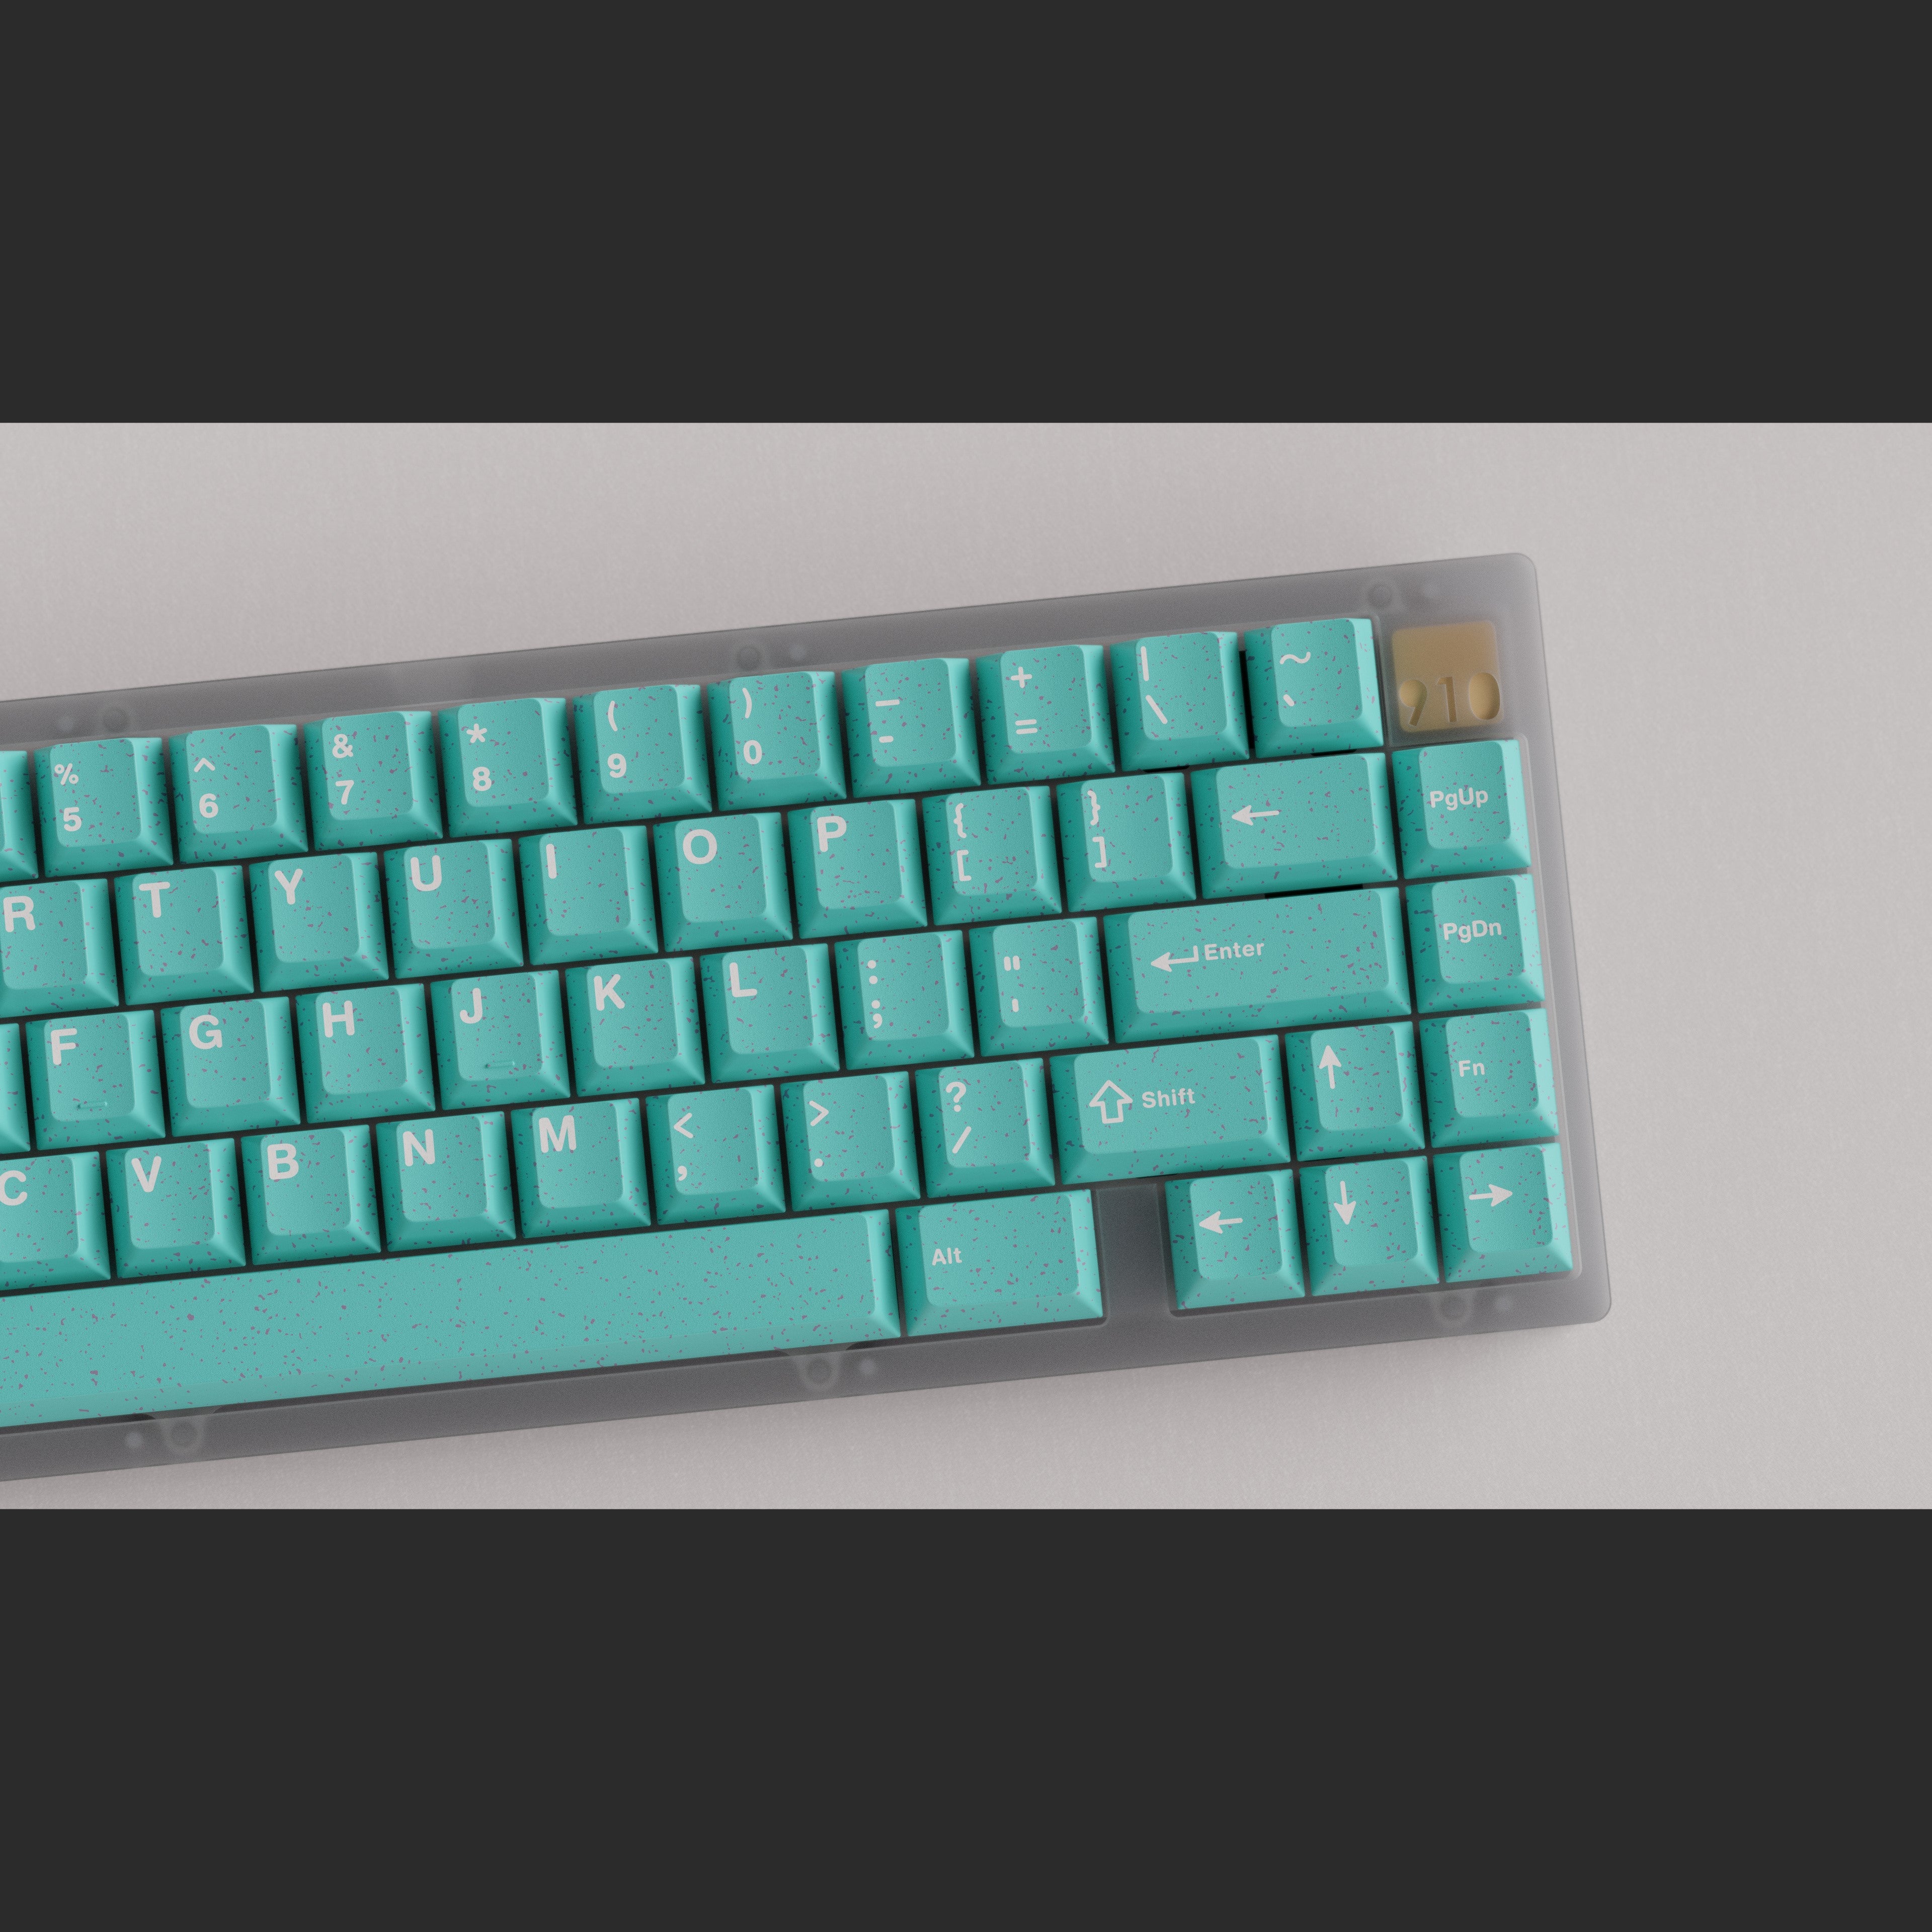 Group-Buy WS Purquoise Keycaps